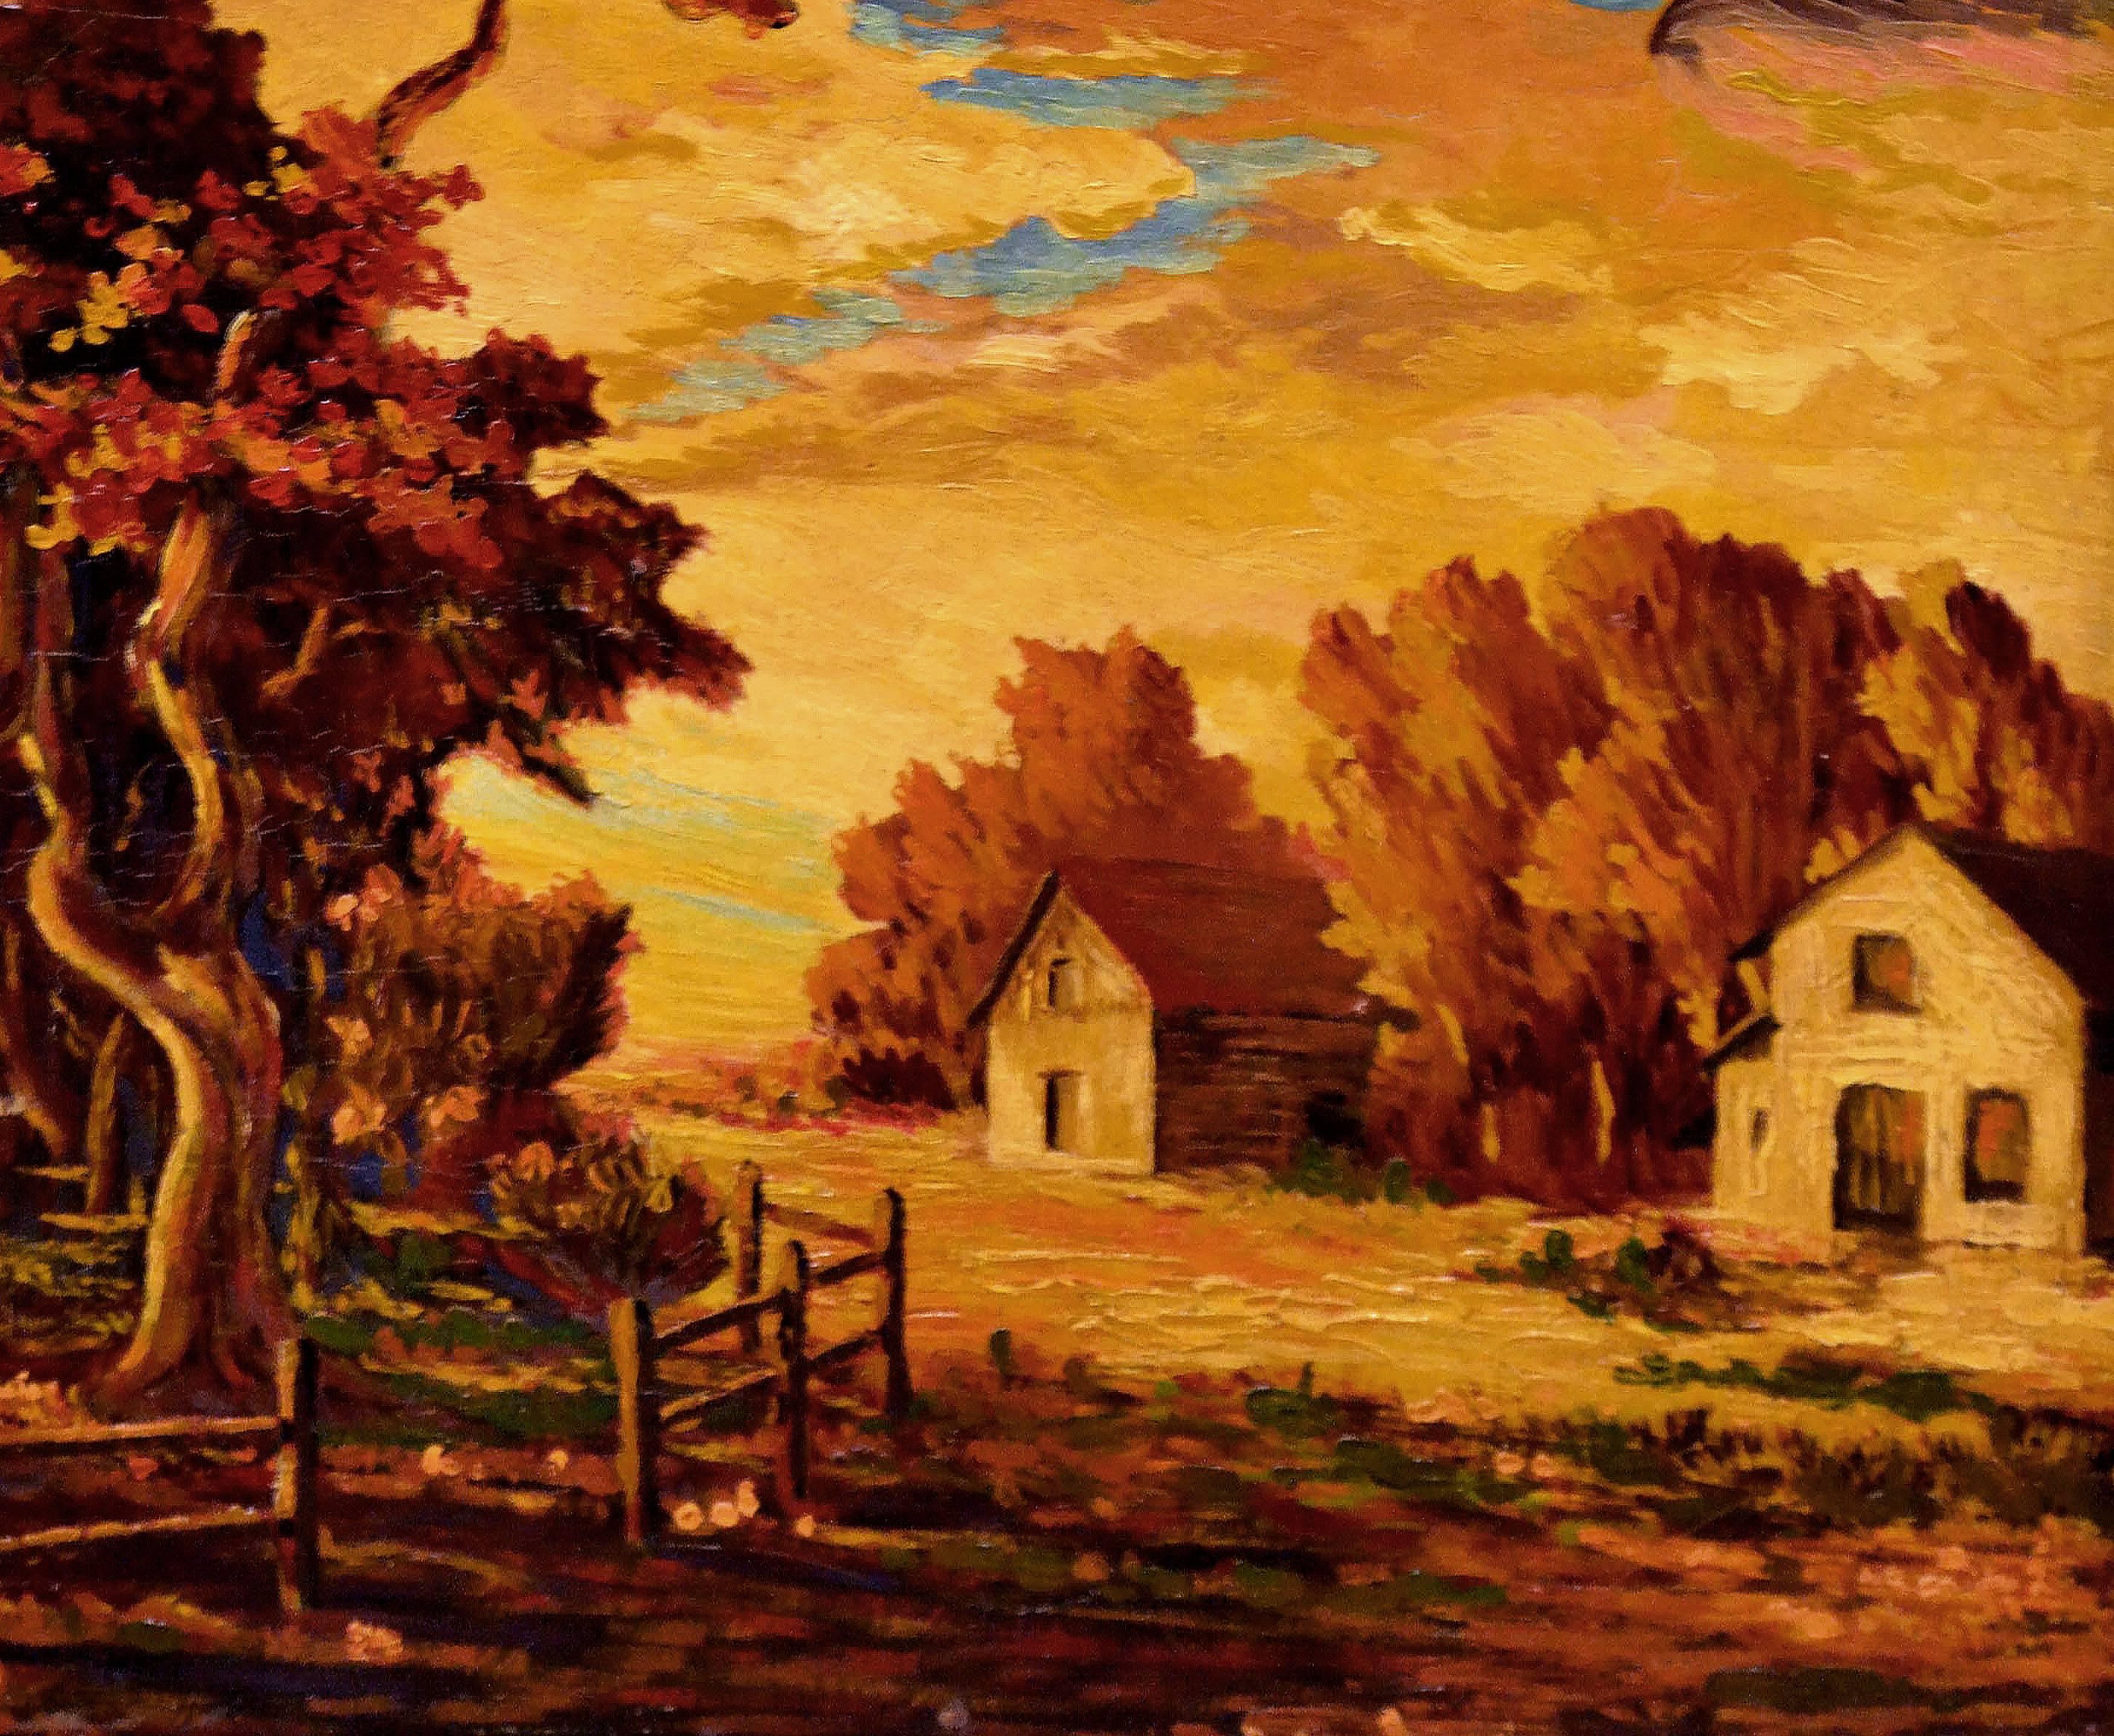 Autumn Landscape - Painting by Unknown